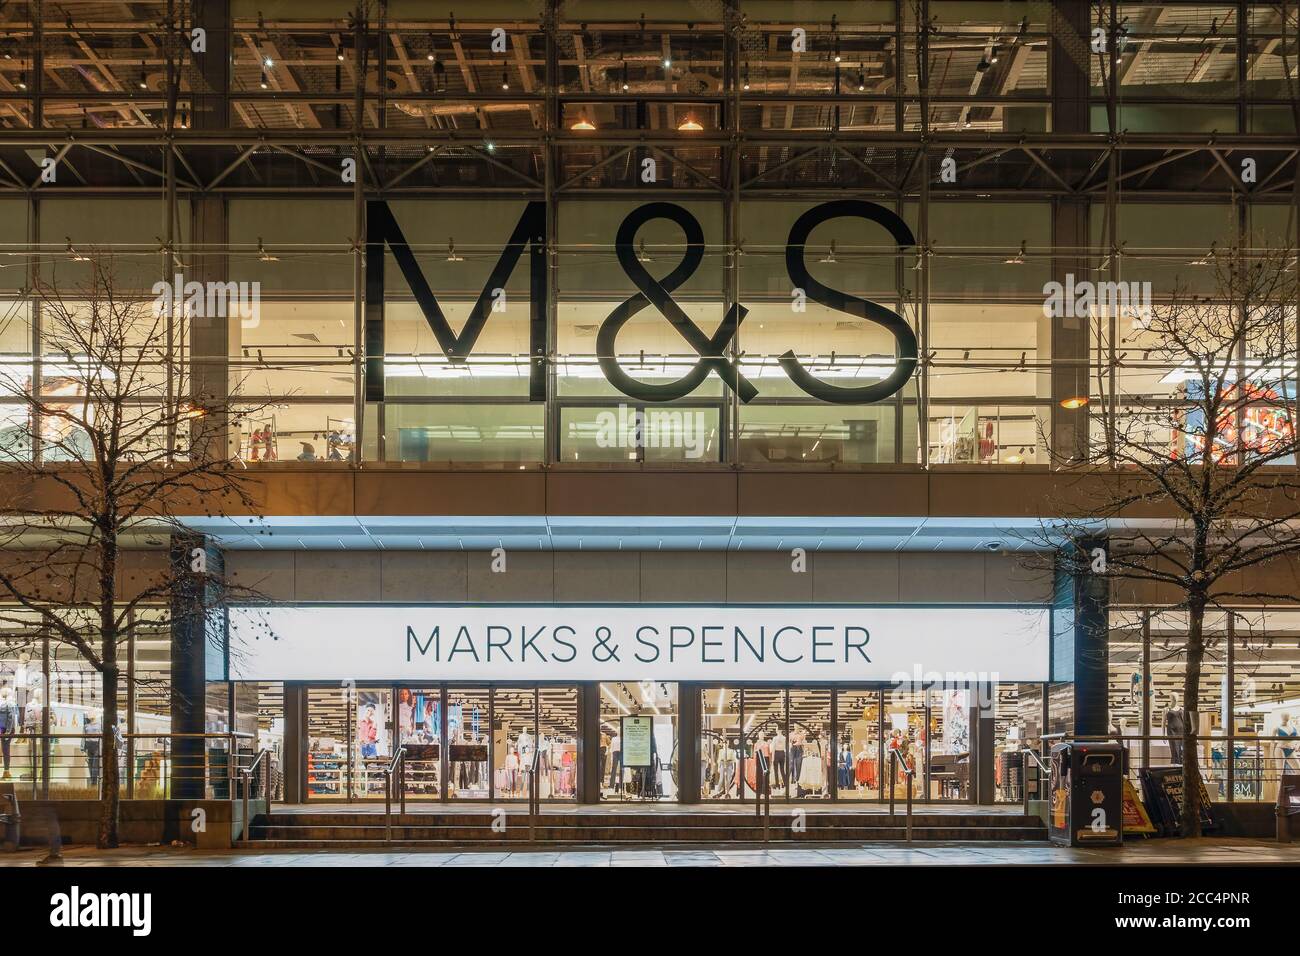 Manchester, UK Marks & Spencer store facade with logo. Illuminated night view of British retailer M&S Group plc closed shop entrance with logo & sign. Stock Photo